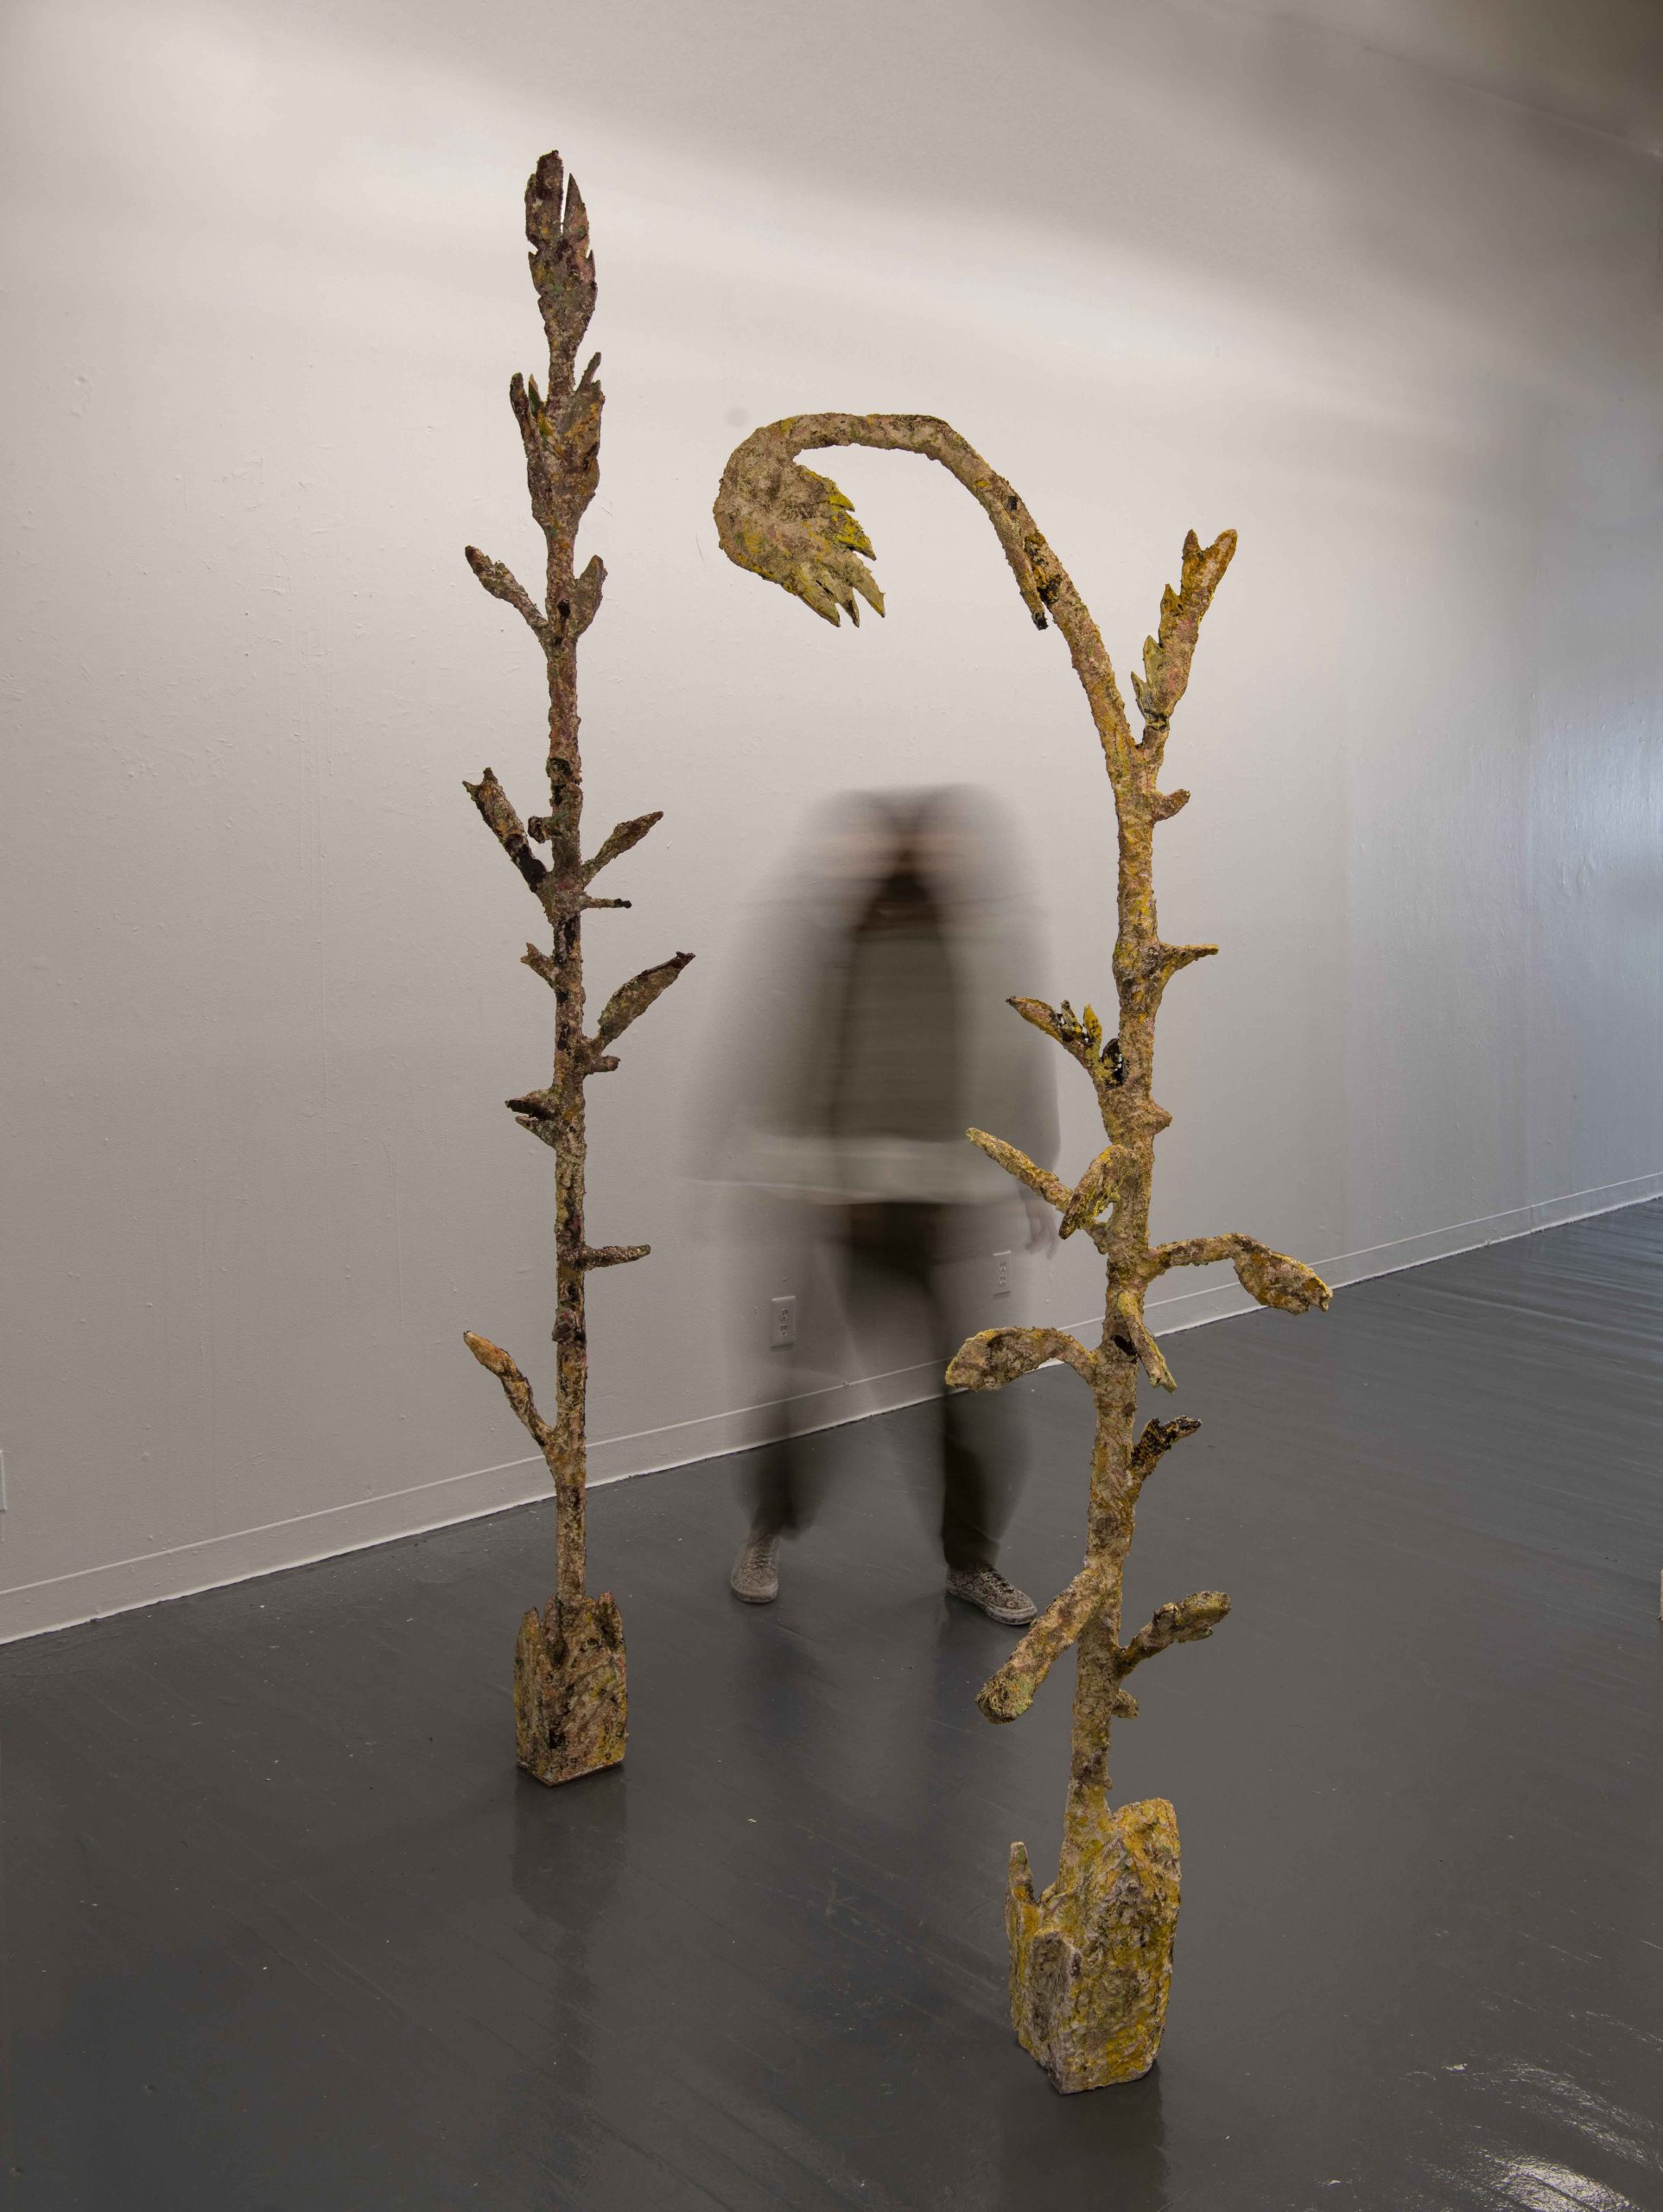 two tall sculptures in the shape of reeds, one person is in between them.